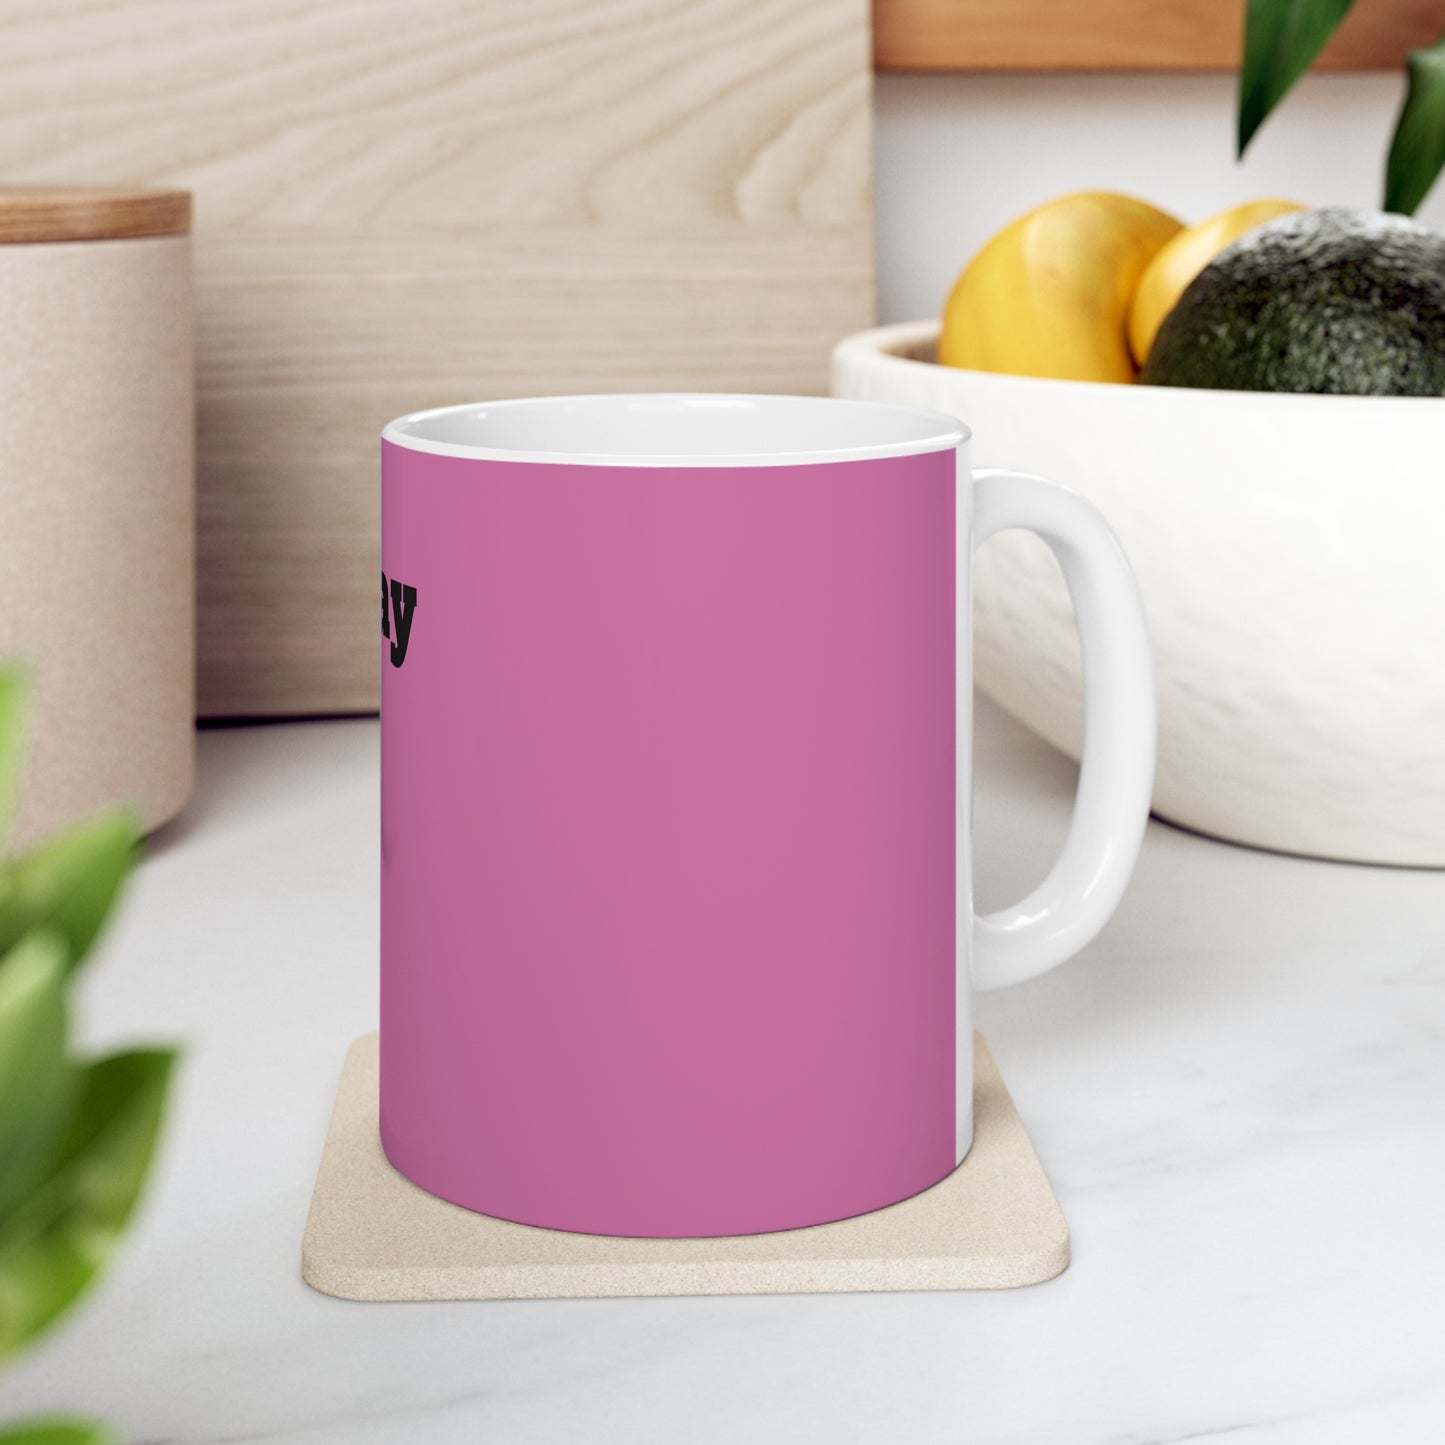 "NOW WHAT DAY YOU SAY TODAY IS? Pink Ceramic Mug 11oz